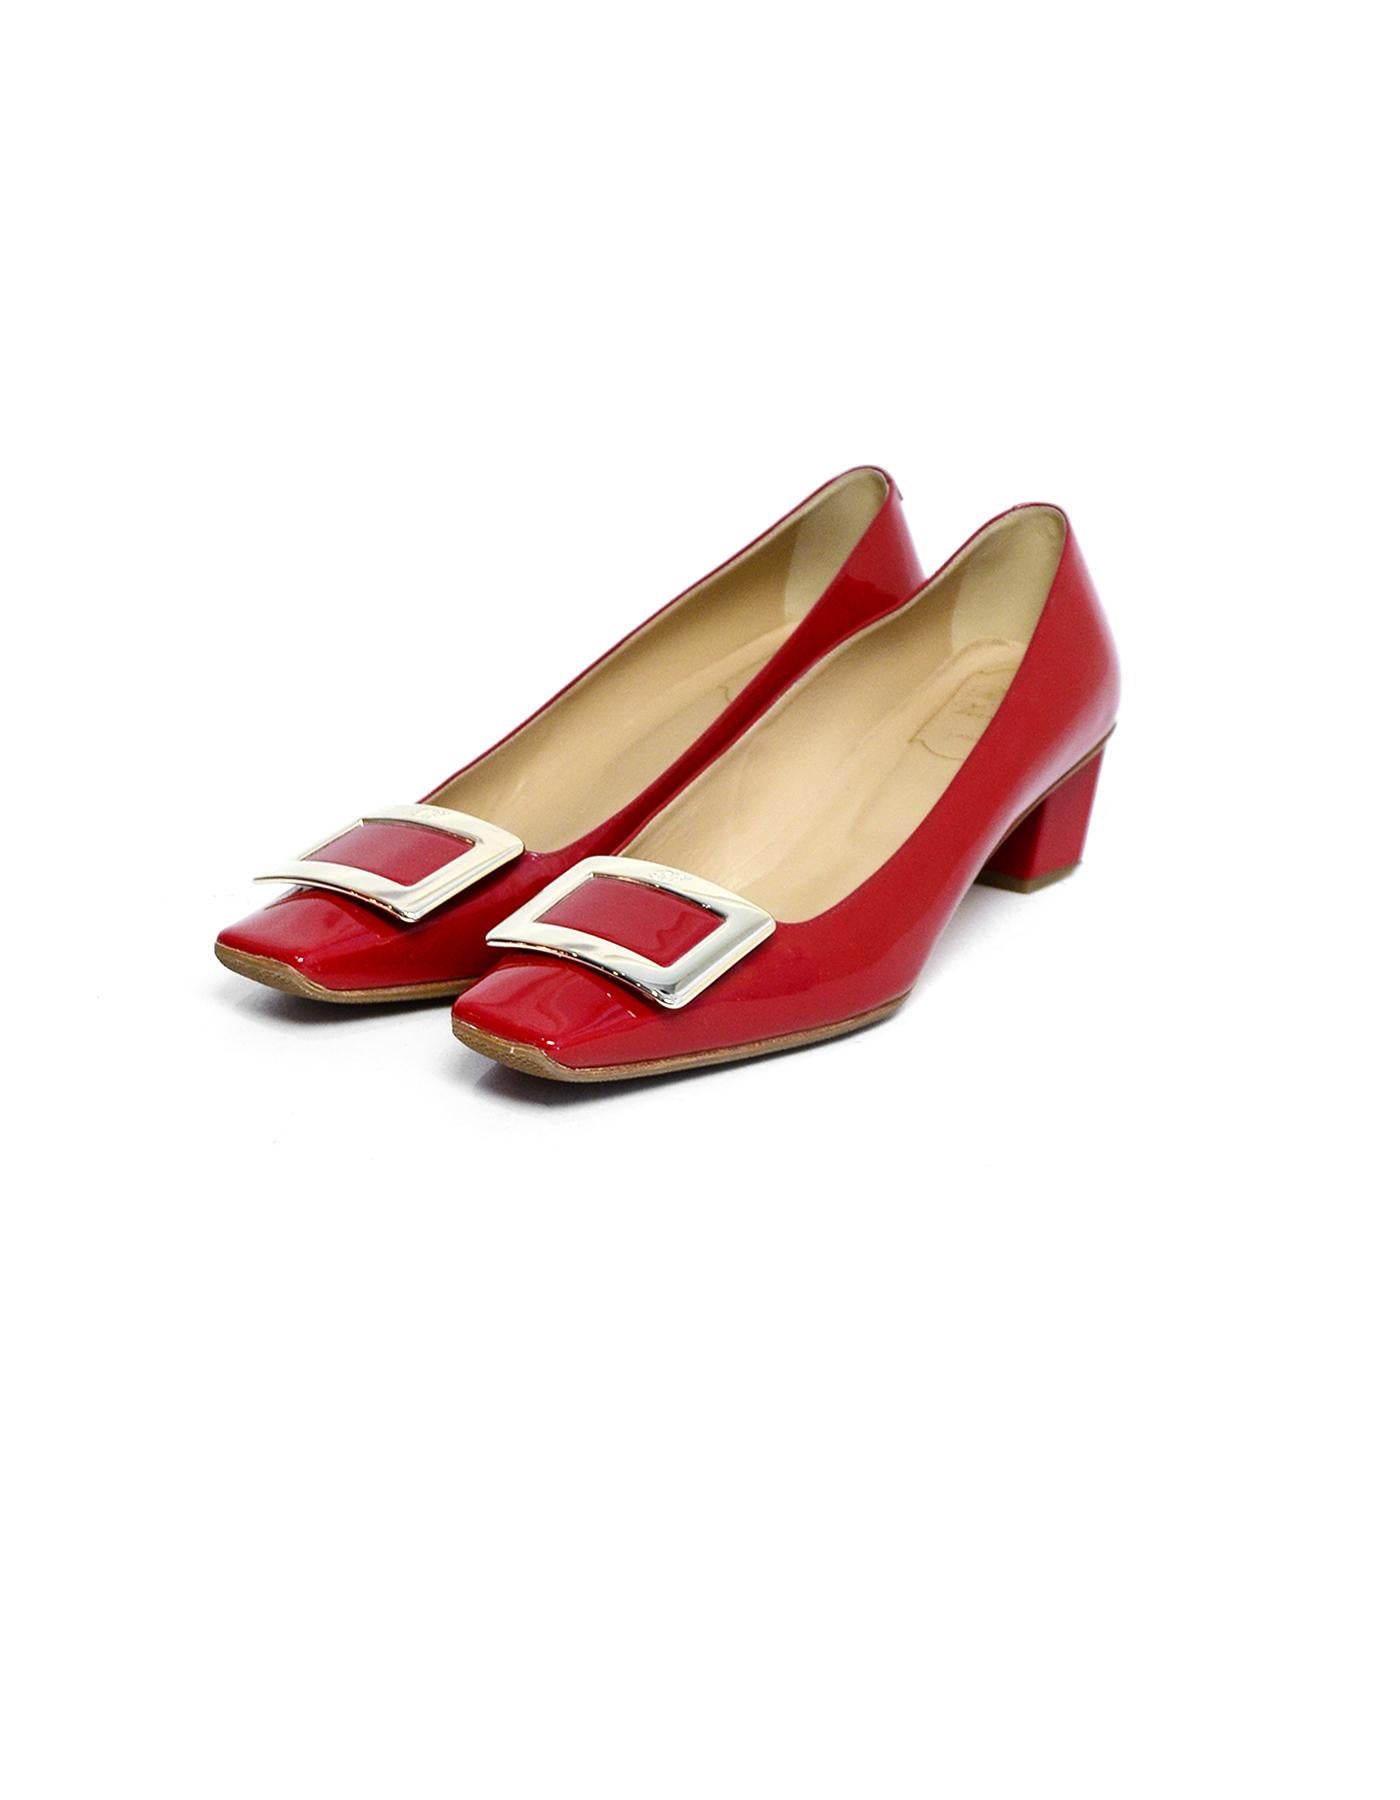 Roger Vivier Red Patent Belle Vivier Pumps w/ Buckle sz 39 rt $725

Made In: Italy
Color: Red
Hardware: Goldtone hardware
Materials: Patent leather
Closure/Opening: Slide on
Overall Condition: Very good pre-owned condition, with added insole and